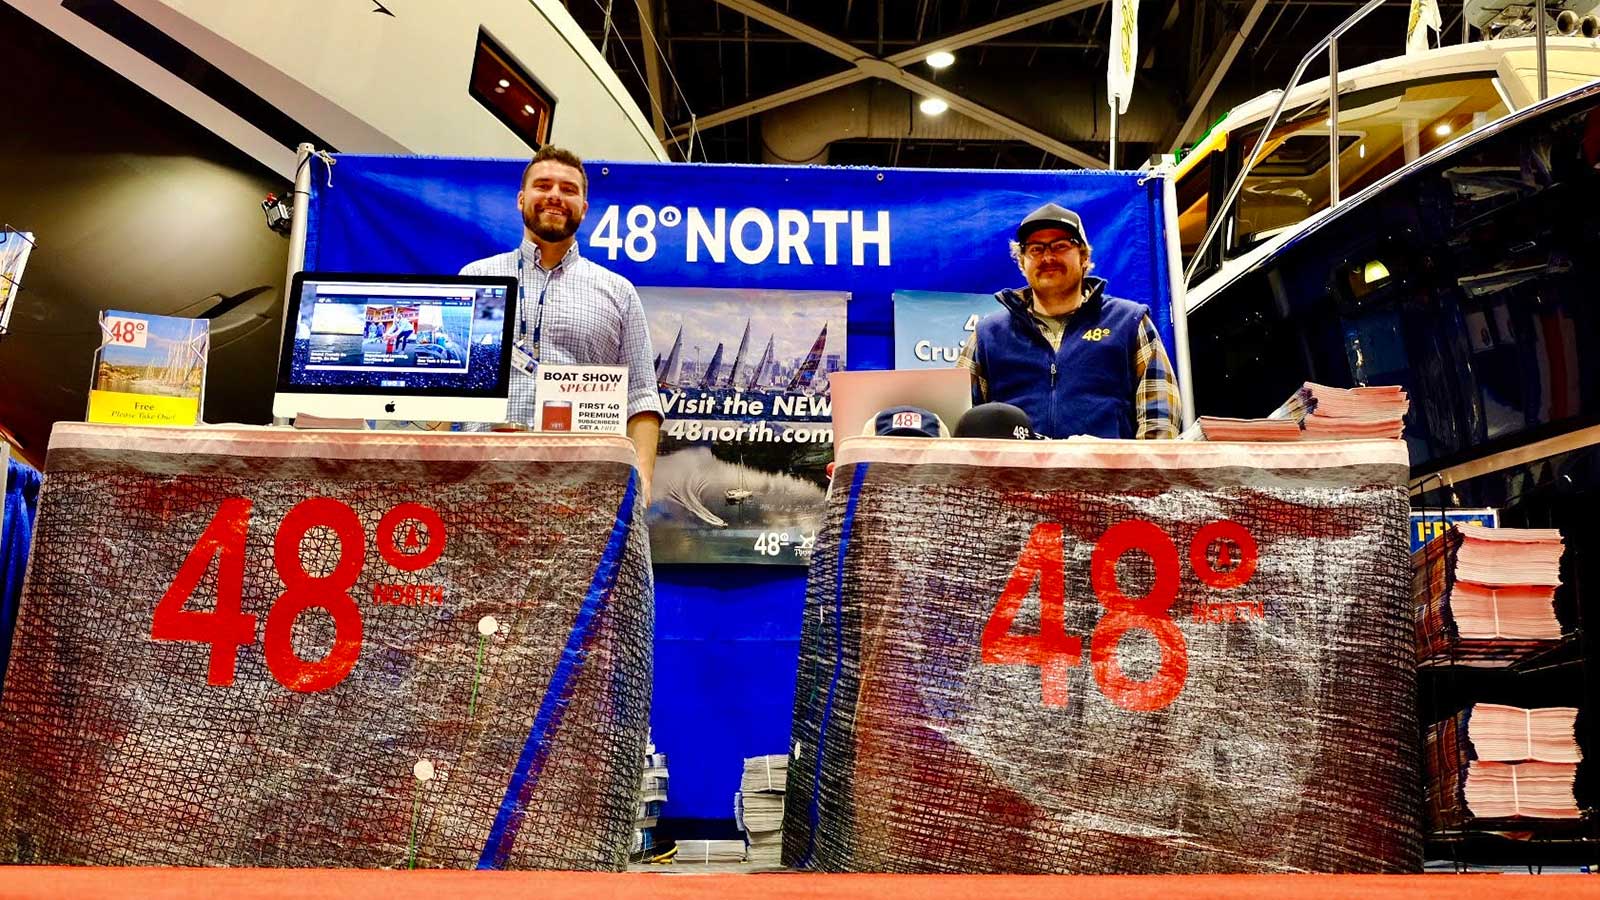 48º North at the Seattle Boat Show